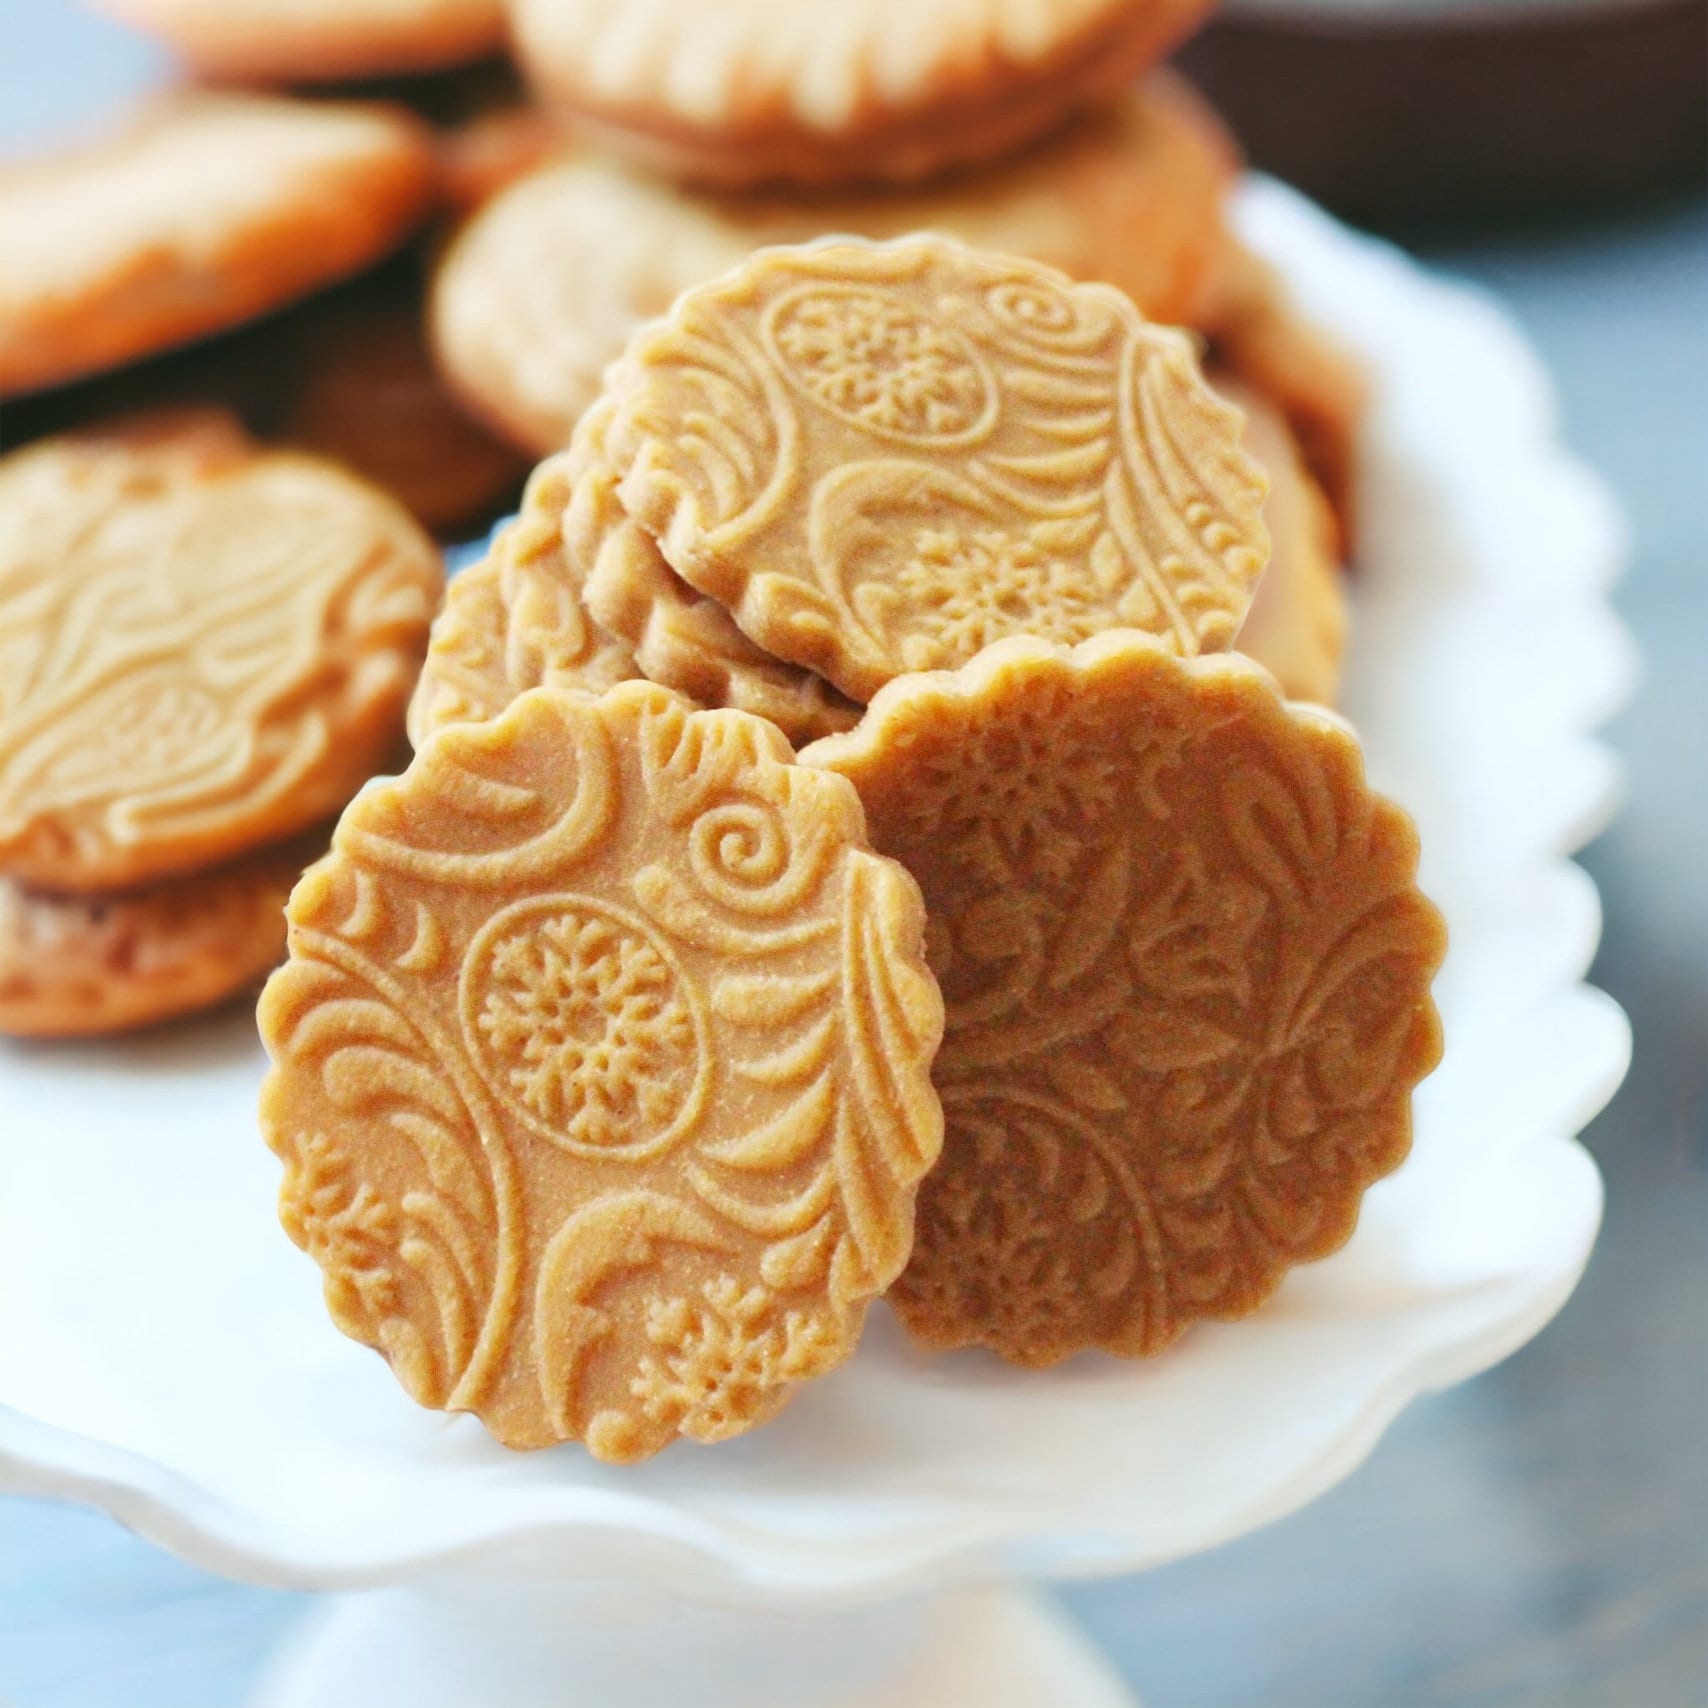 peanut butter dog biscuits with folk pattern - 0